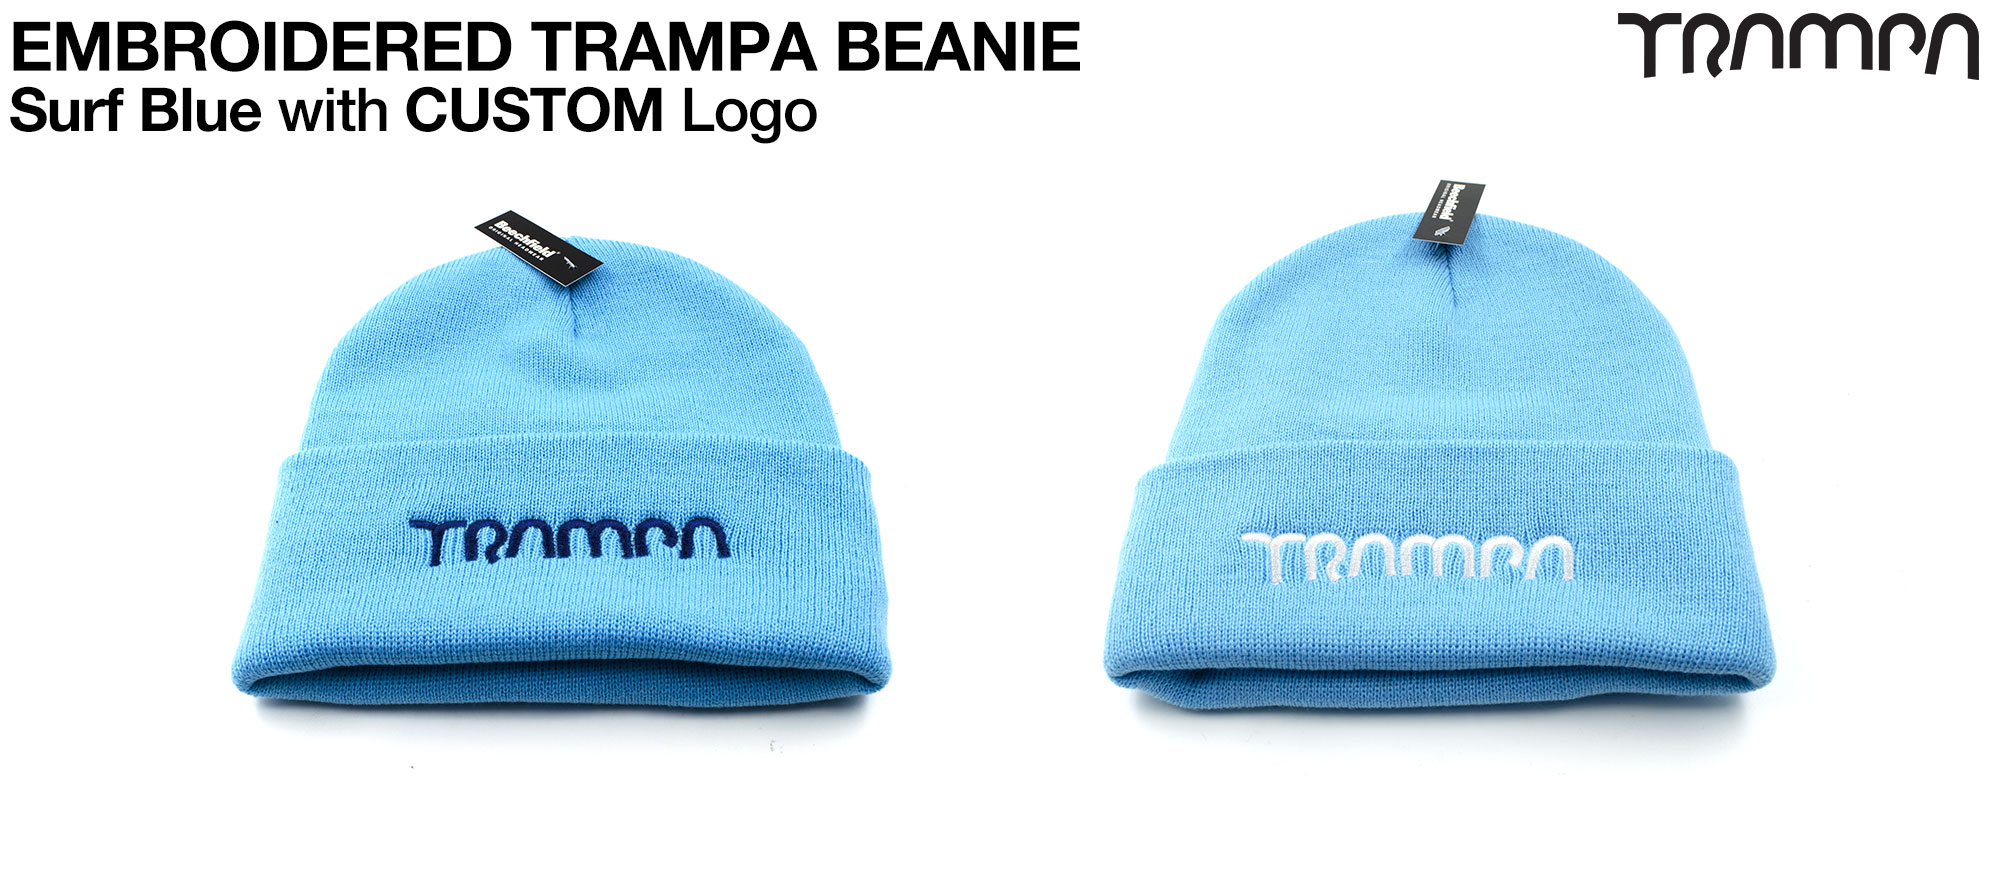 SURF BLUE Beanie hat with EMBROIDERED TRAMPA logo  (£12.50)